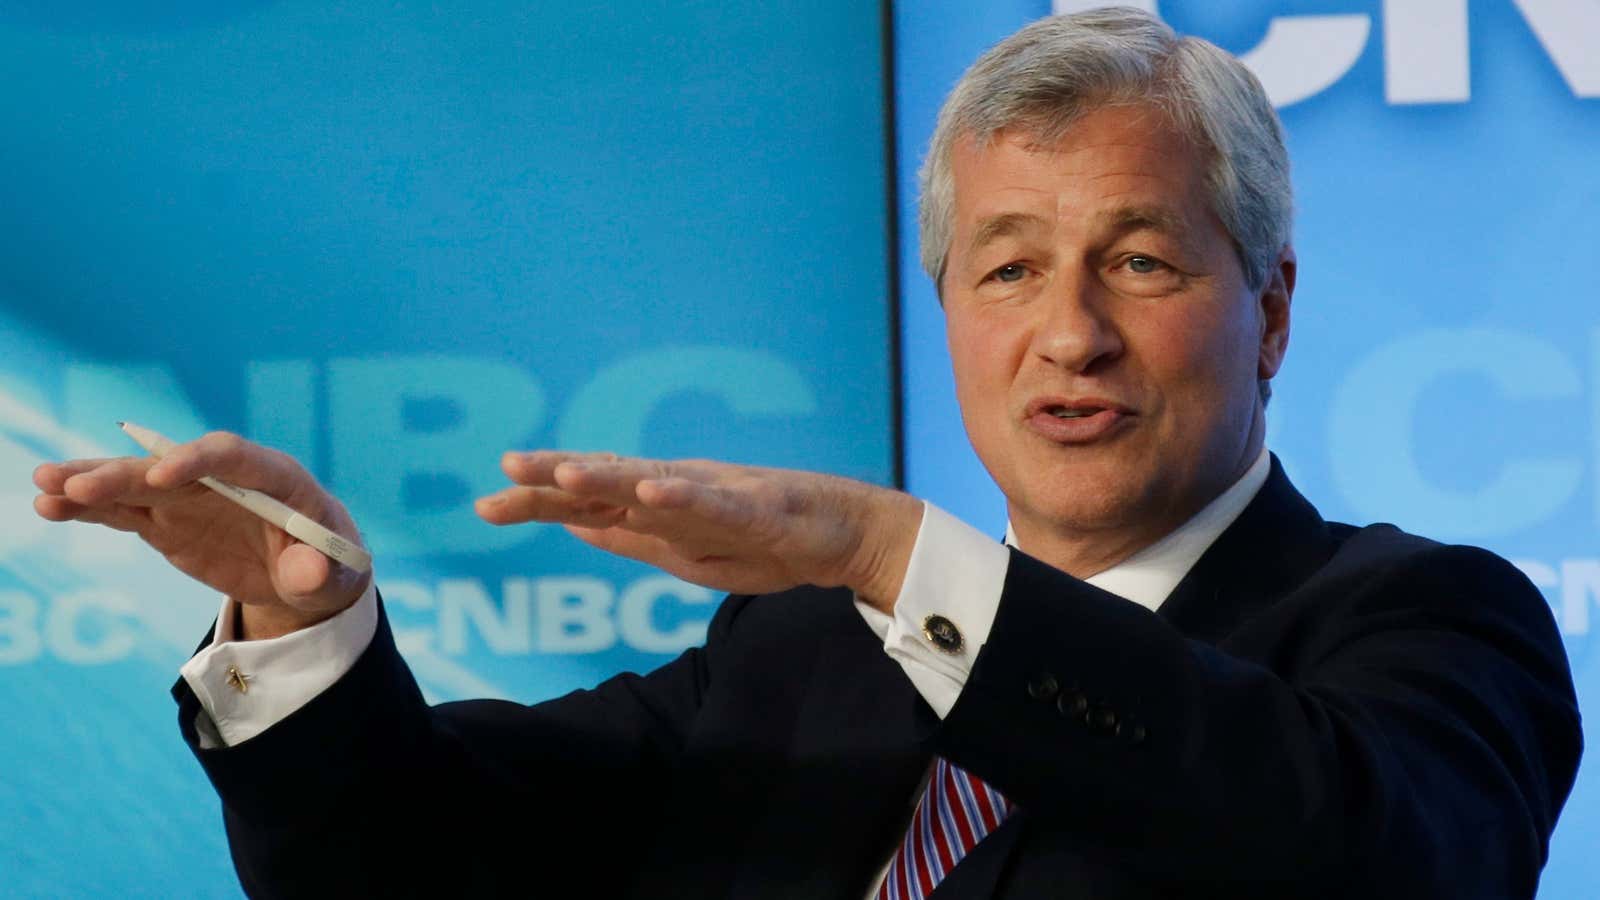 Jamie Dimon focuses on cost cutting in wake of Whale